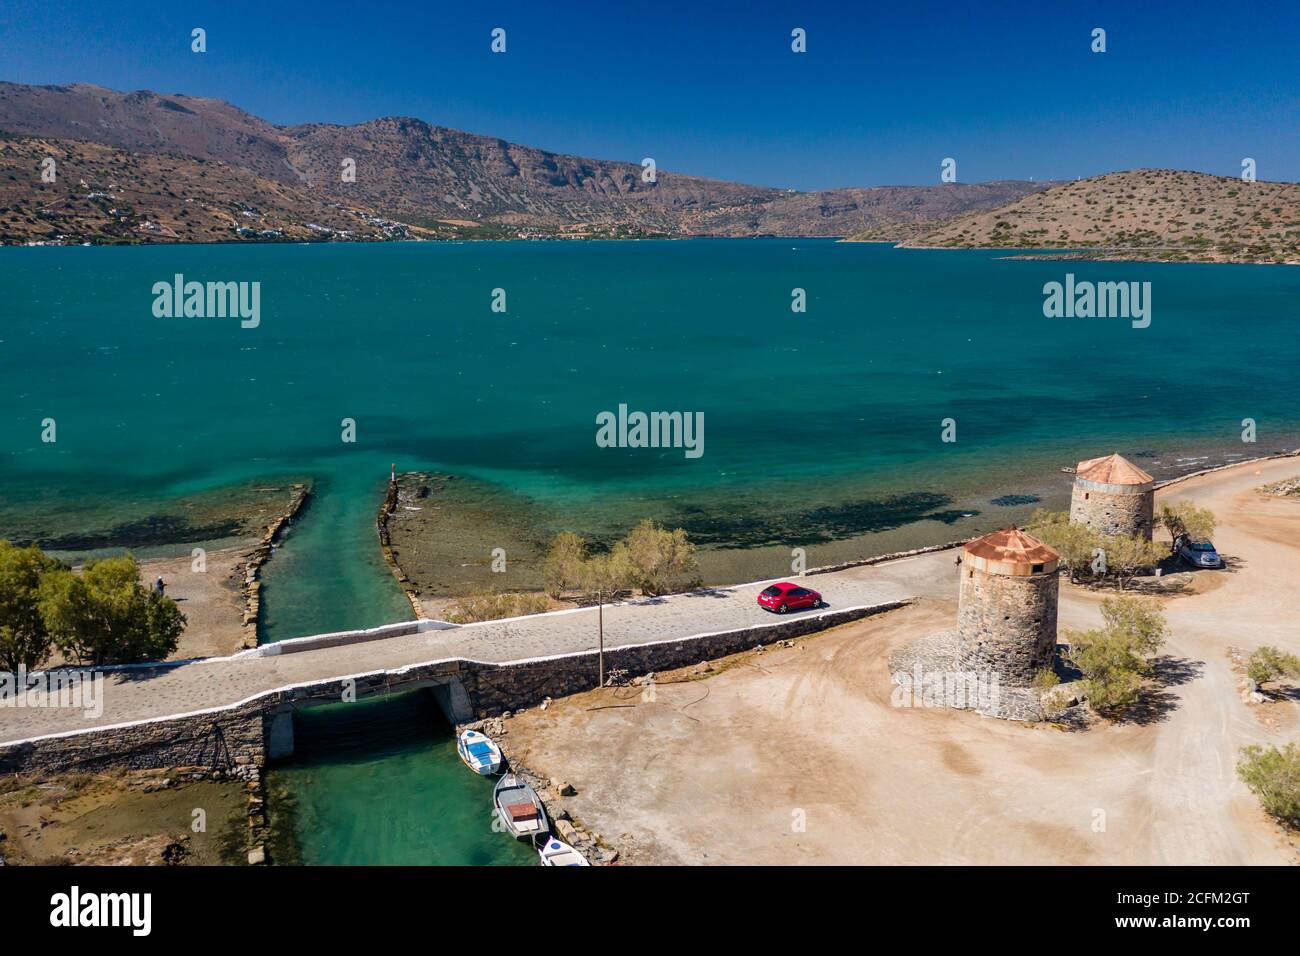 Old windmills and canal on a narrow causeway and site of an ancient Minoan city (Elounda, Crete, Greece) Stock Photo